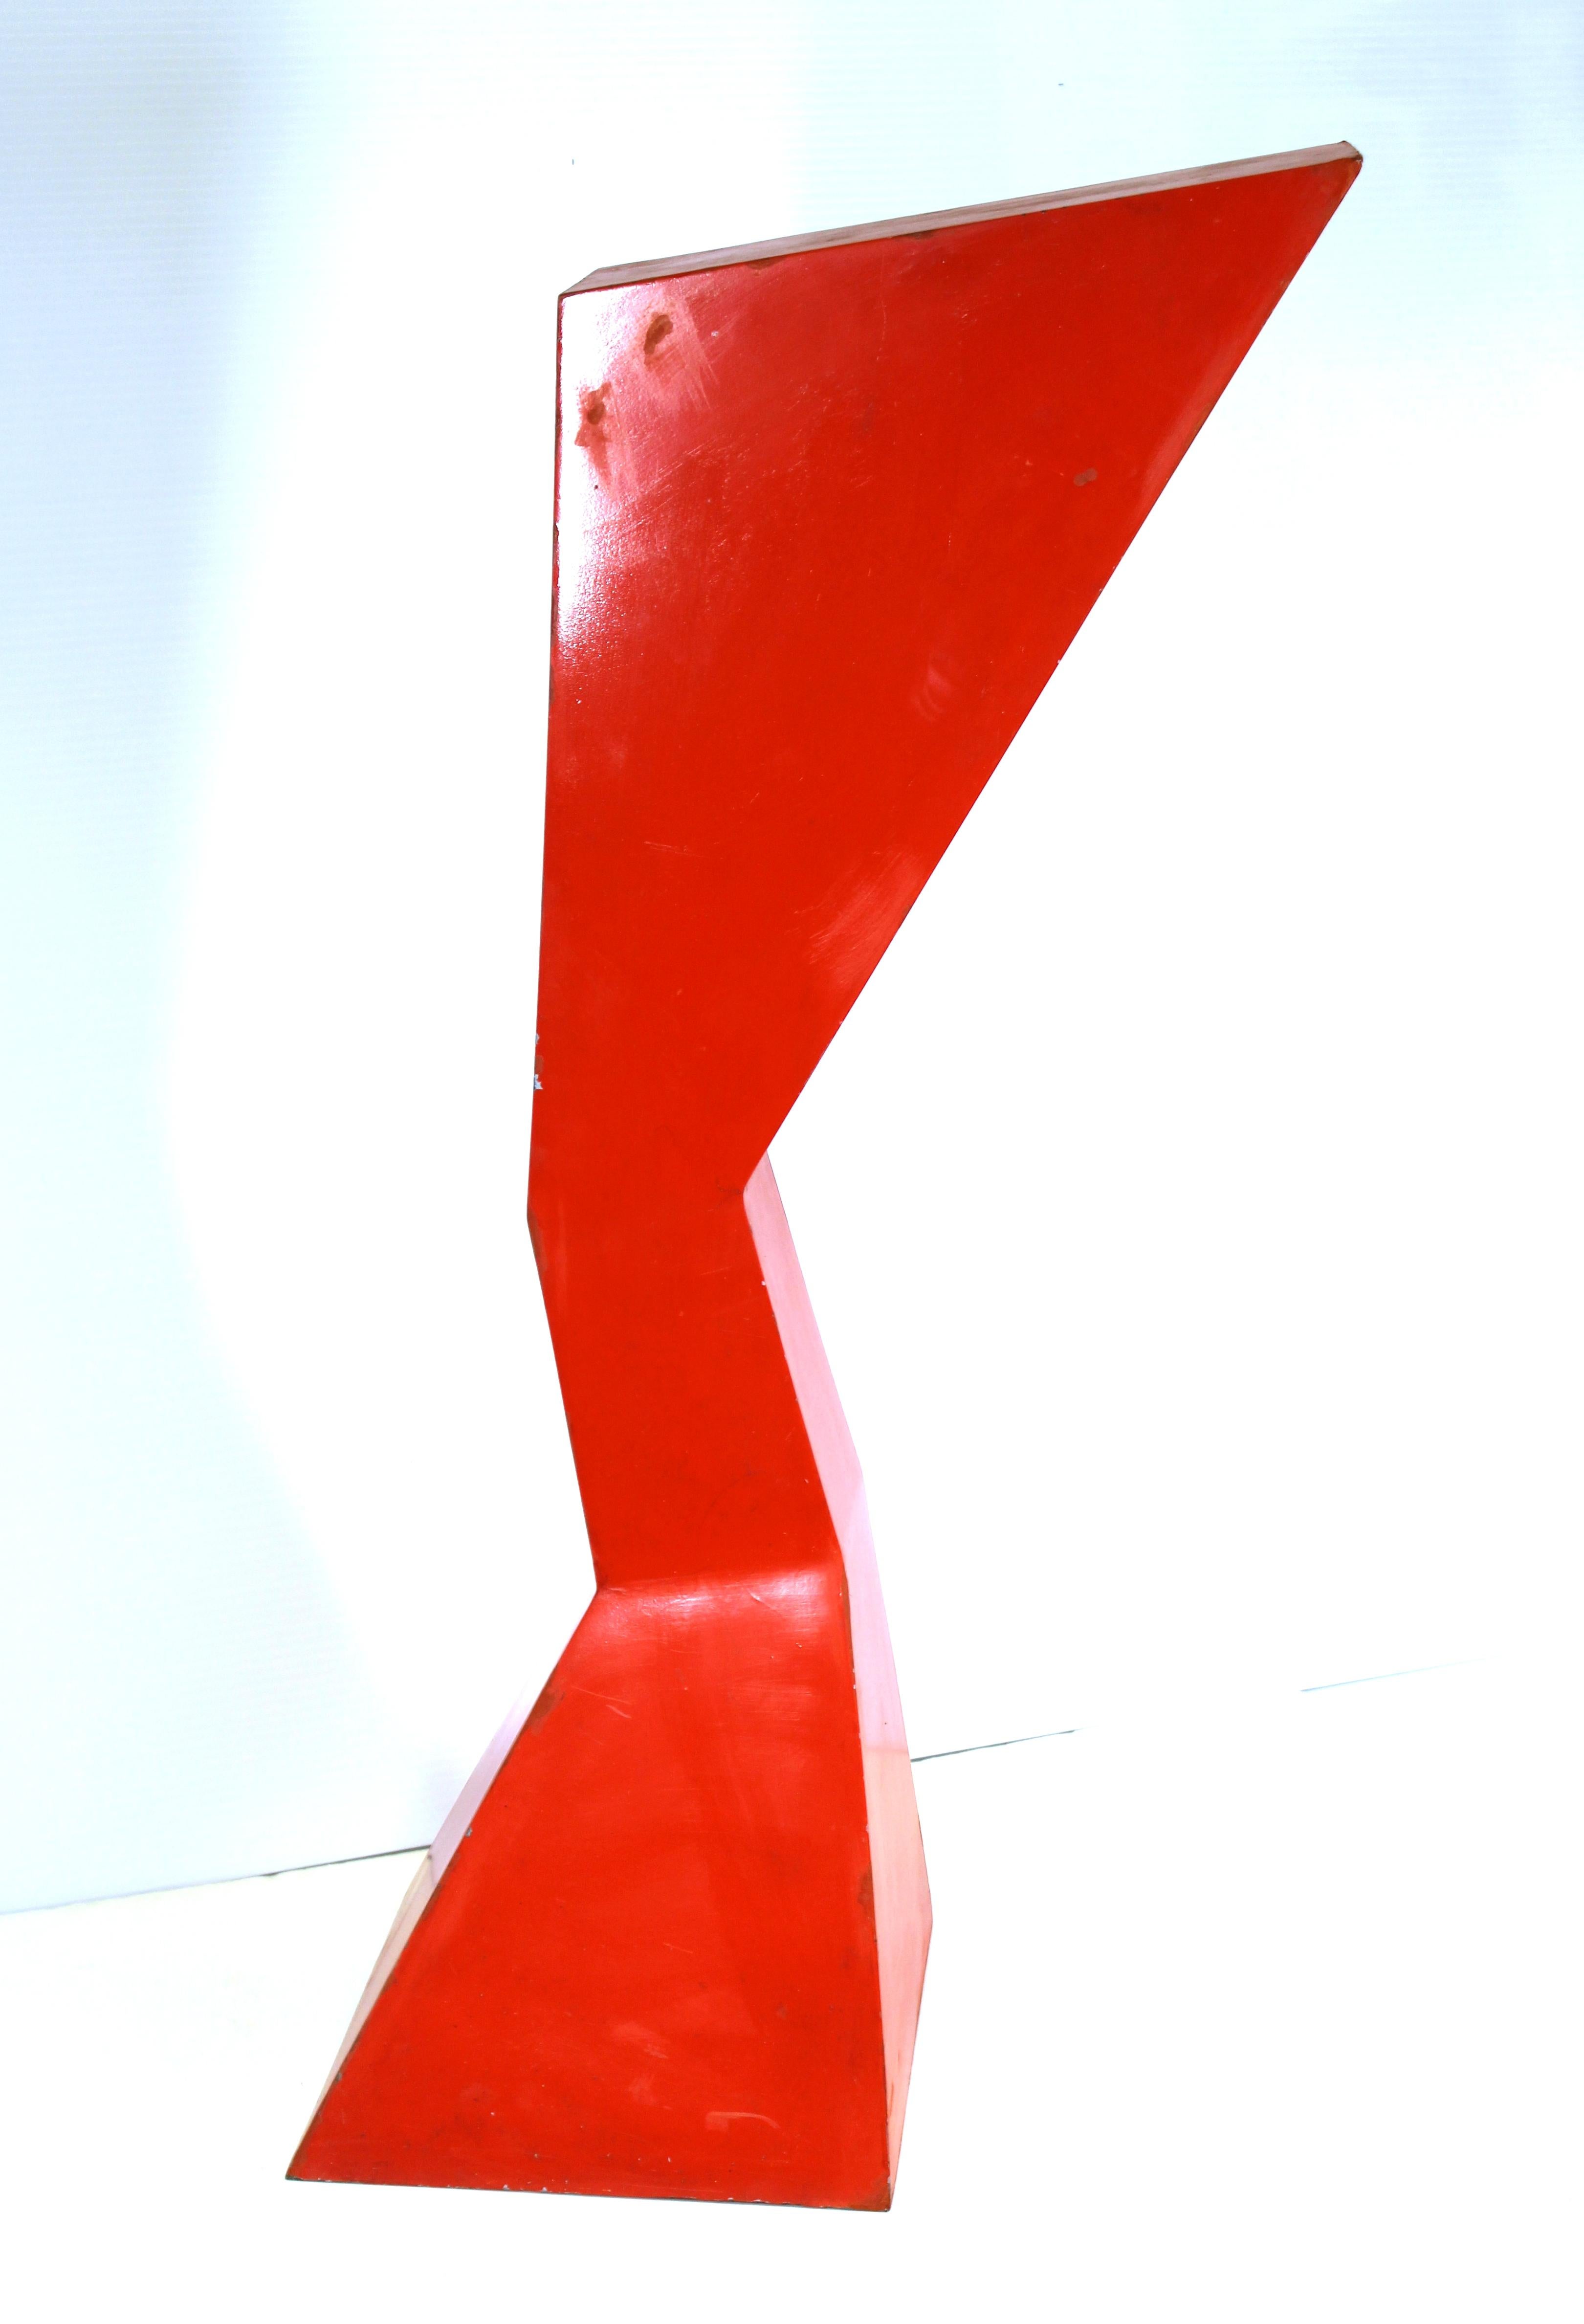 Modern abstract metal sculpture in red enameled metal. Likely made in the mid-20th century, the piece is in great vintage condition with age-appropriate wear.